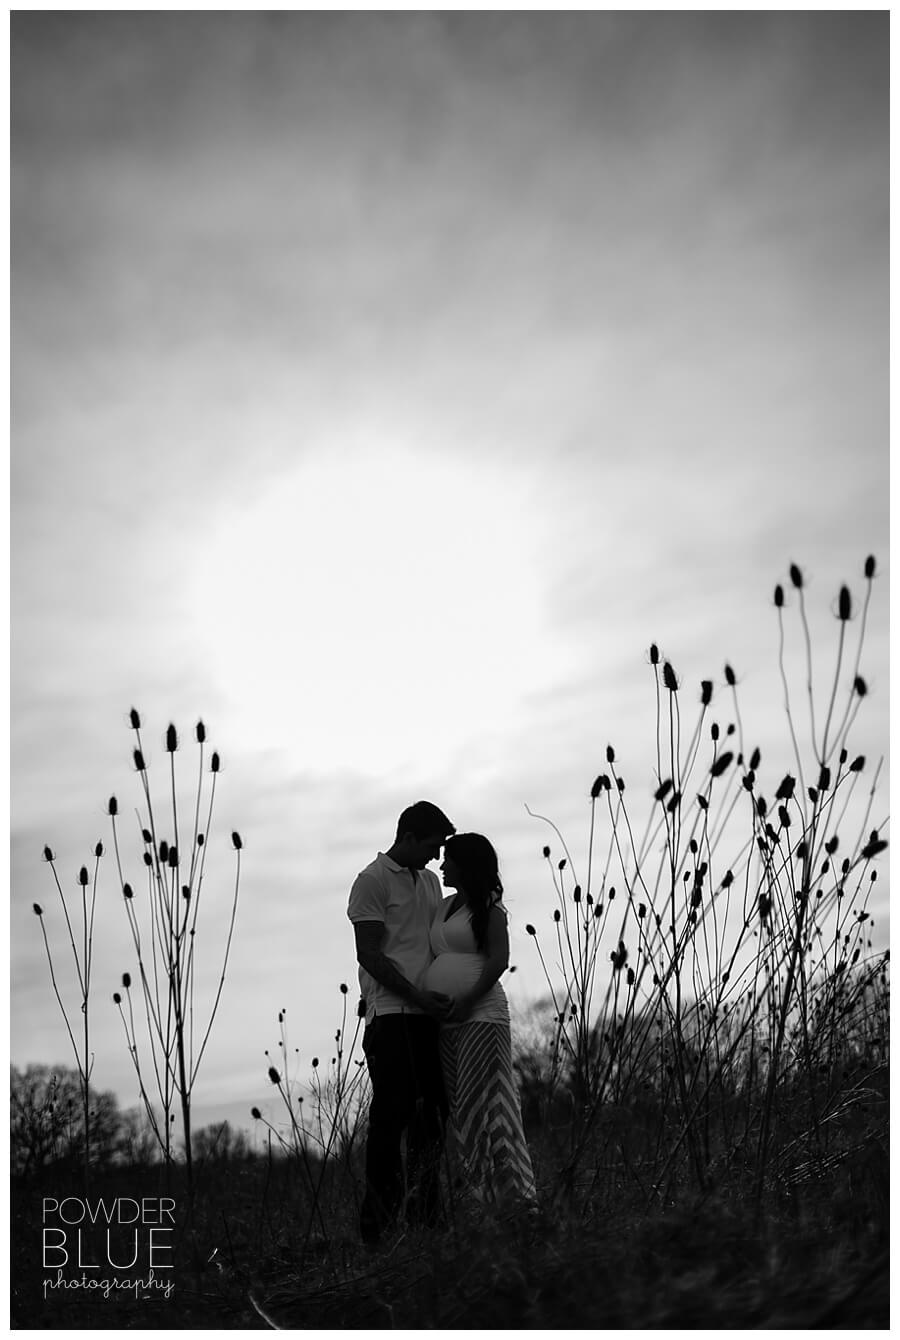 maternity portrait on location tall grassy fields and backlighting golden hour pittsburgh silhouette